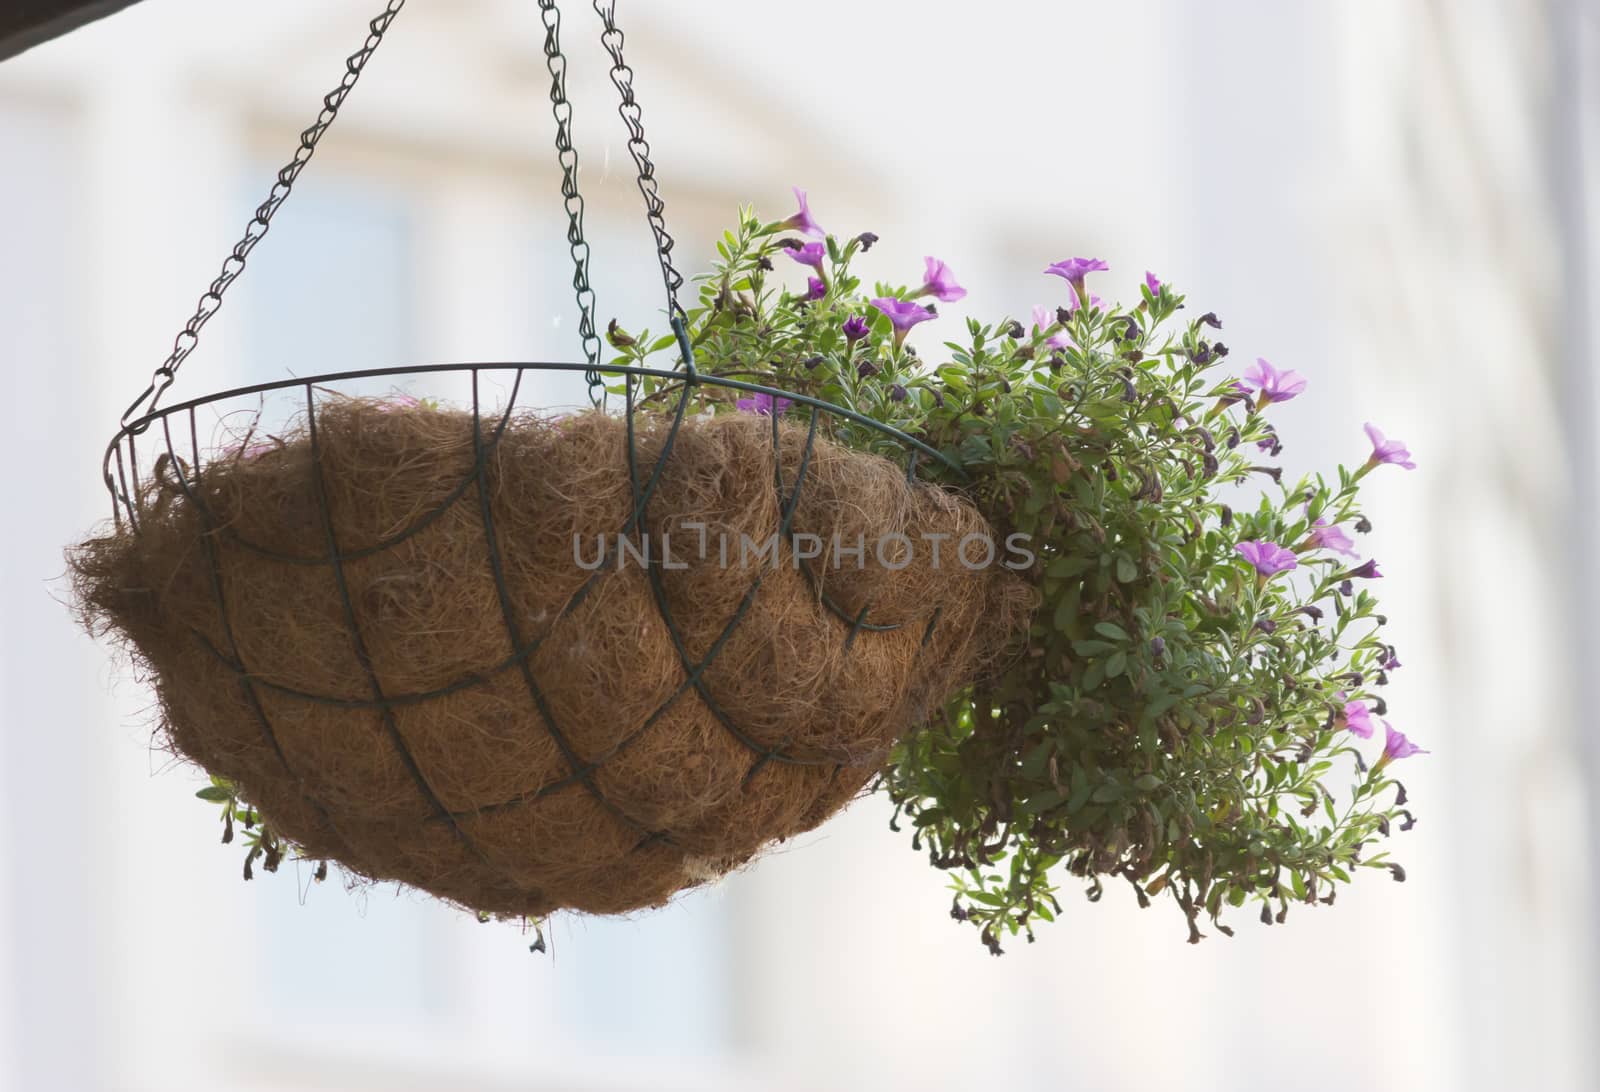 flower pot with purple flowers hang on the street